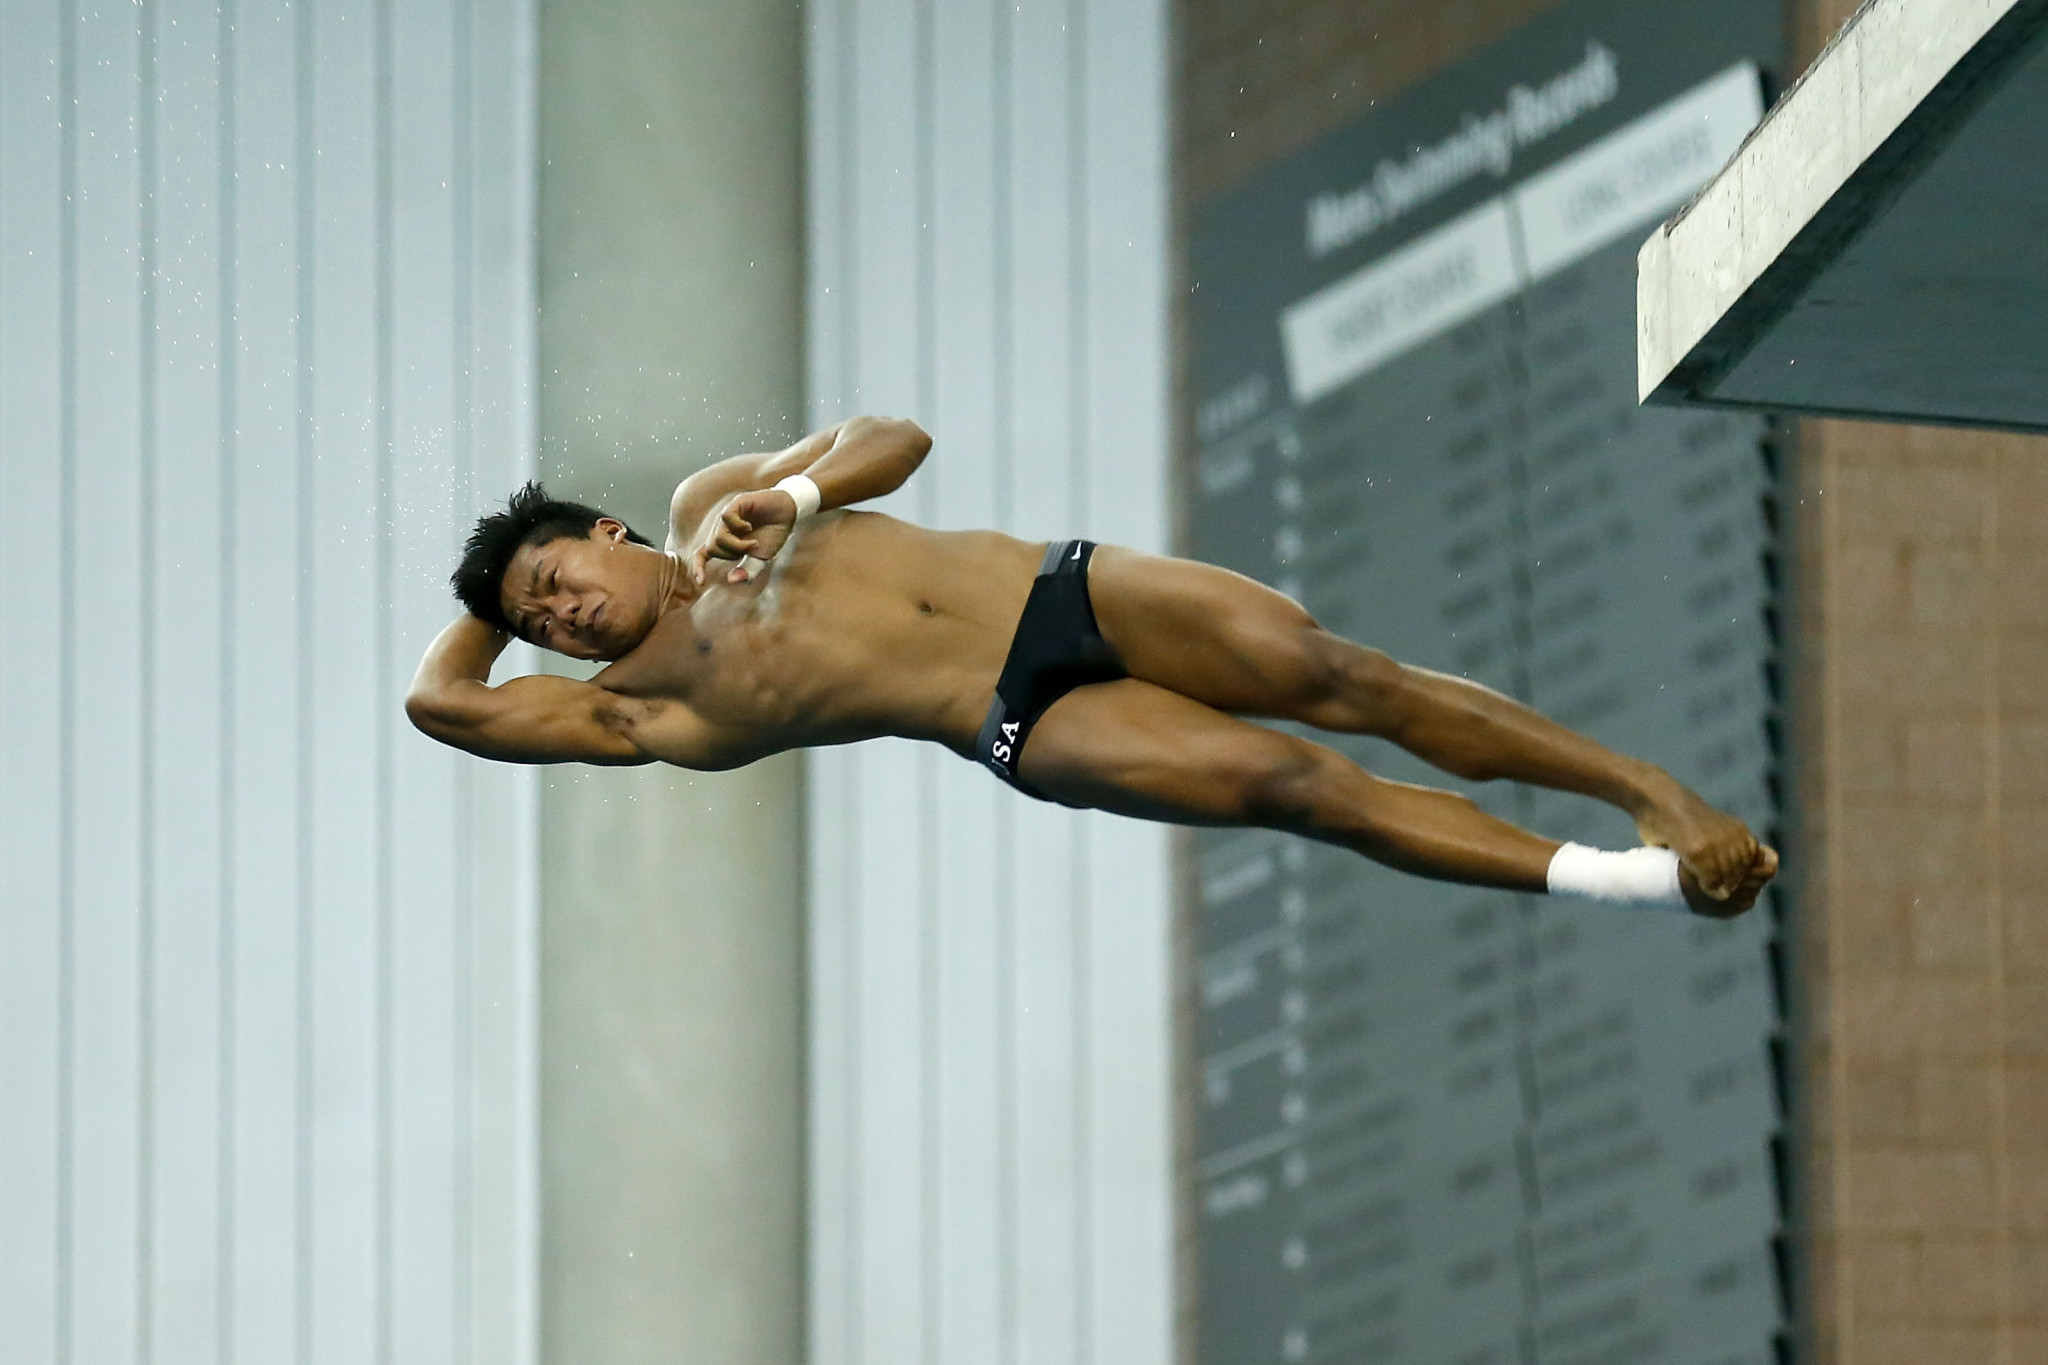 Jordan Windle was among the American divers to progress to the finals ©Getty Images